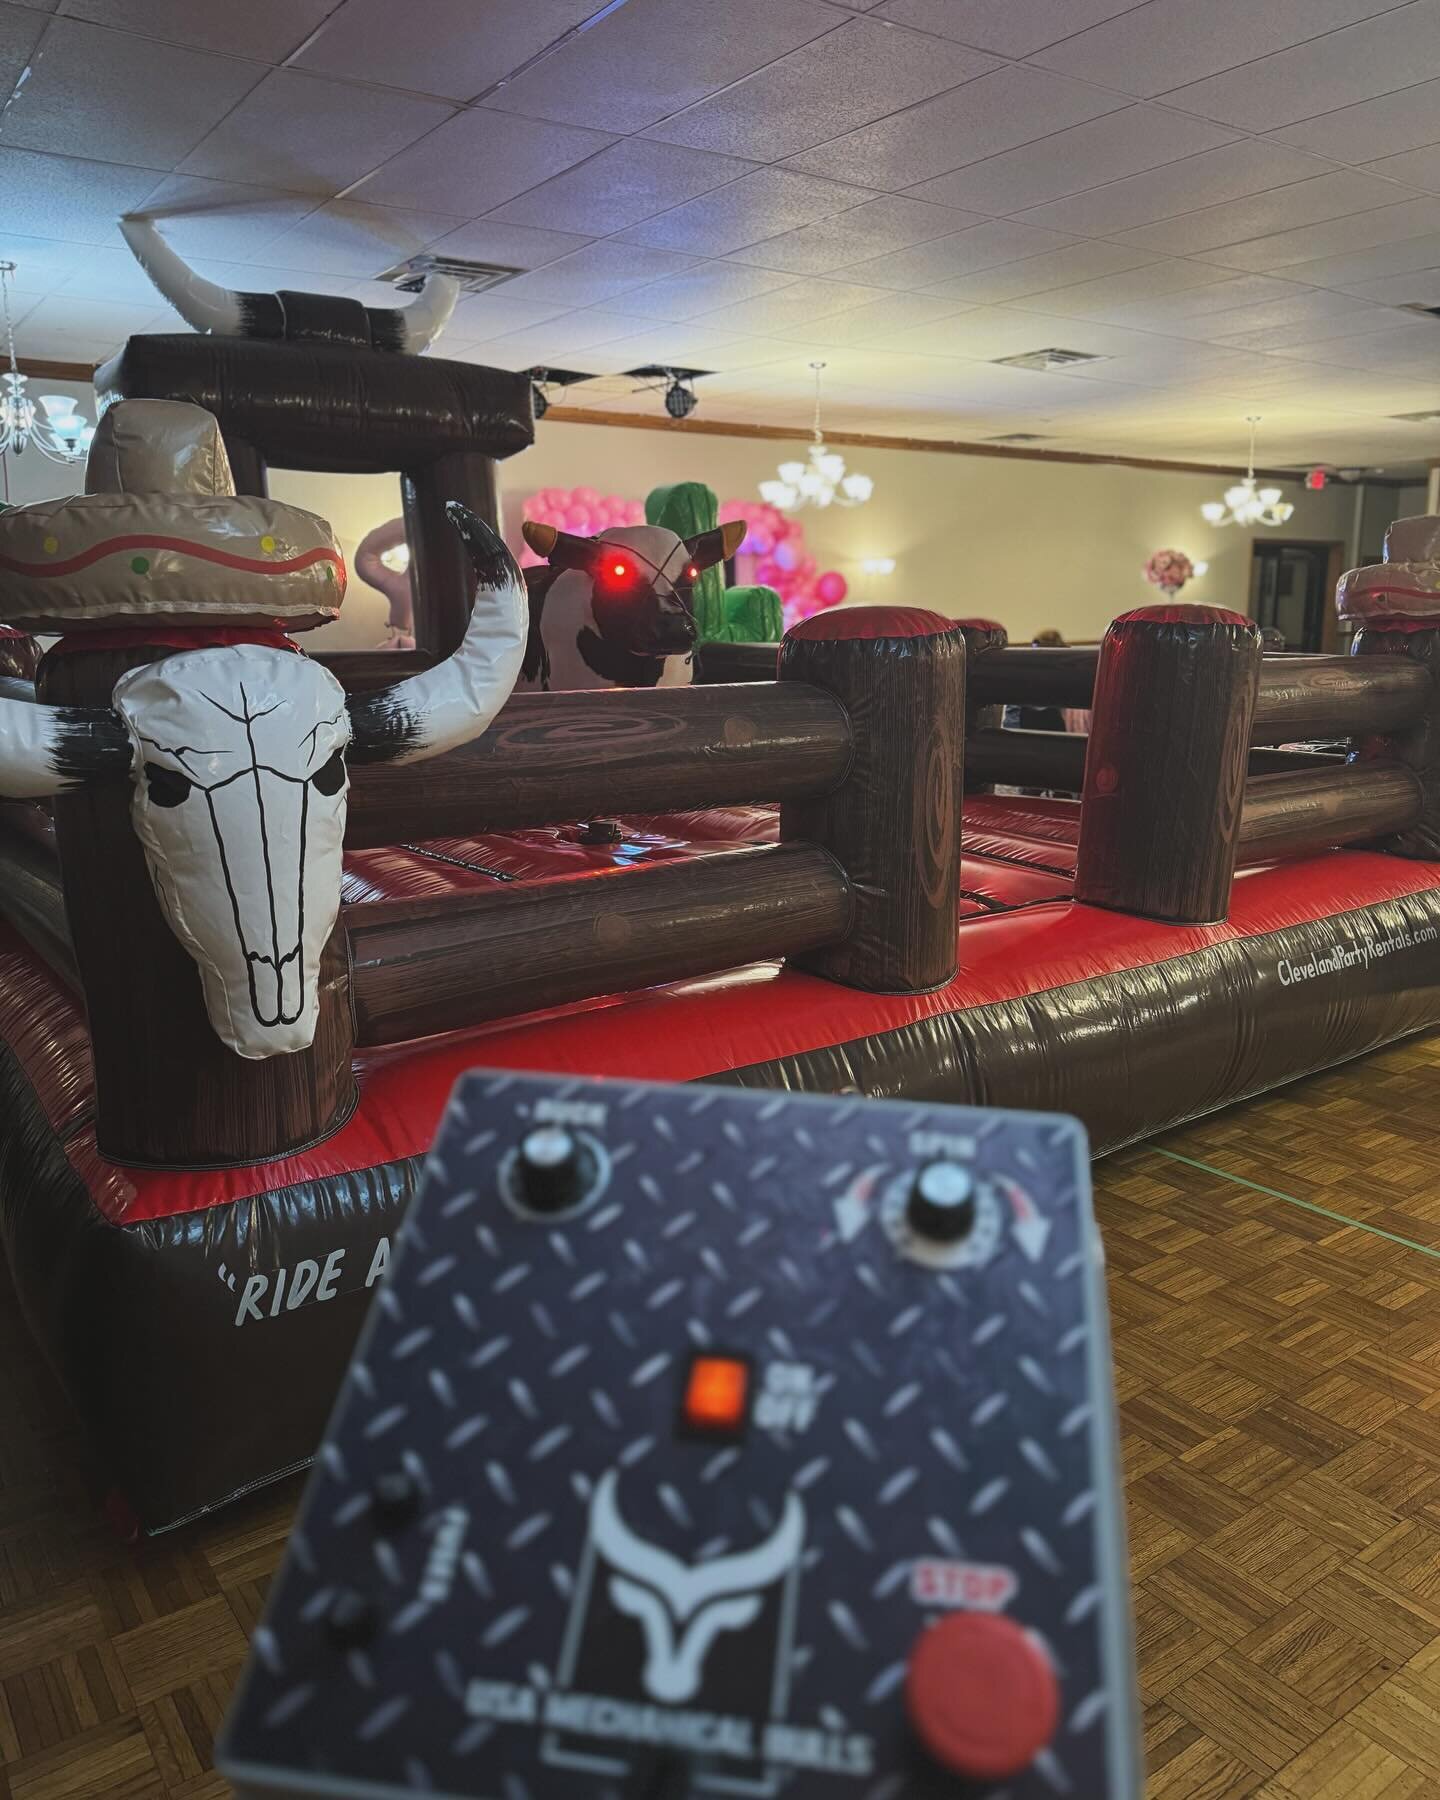 Our mechanical bull setup 🐂
@clepartyrentals